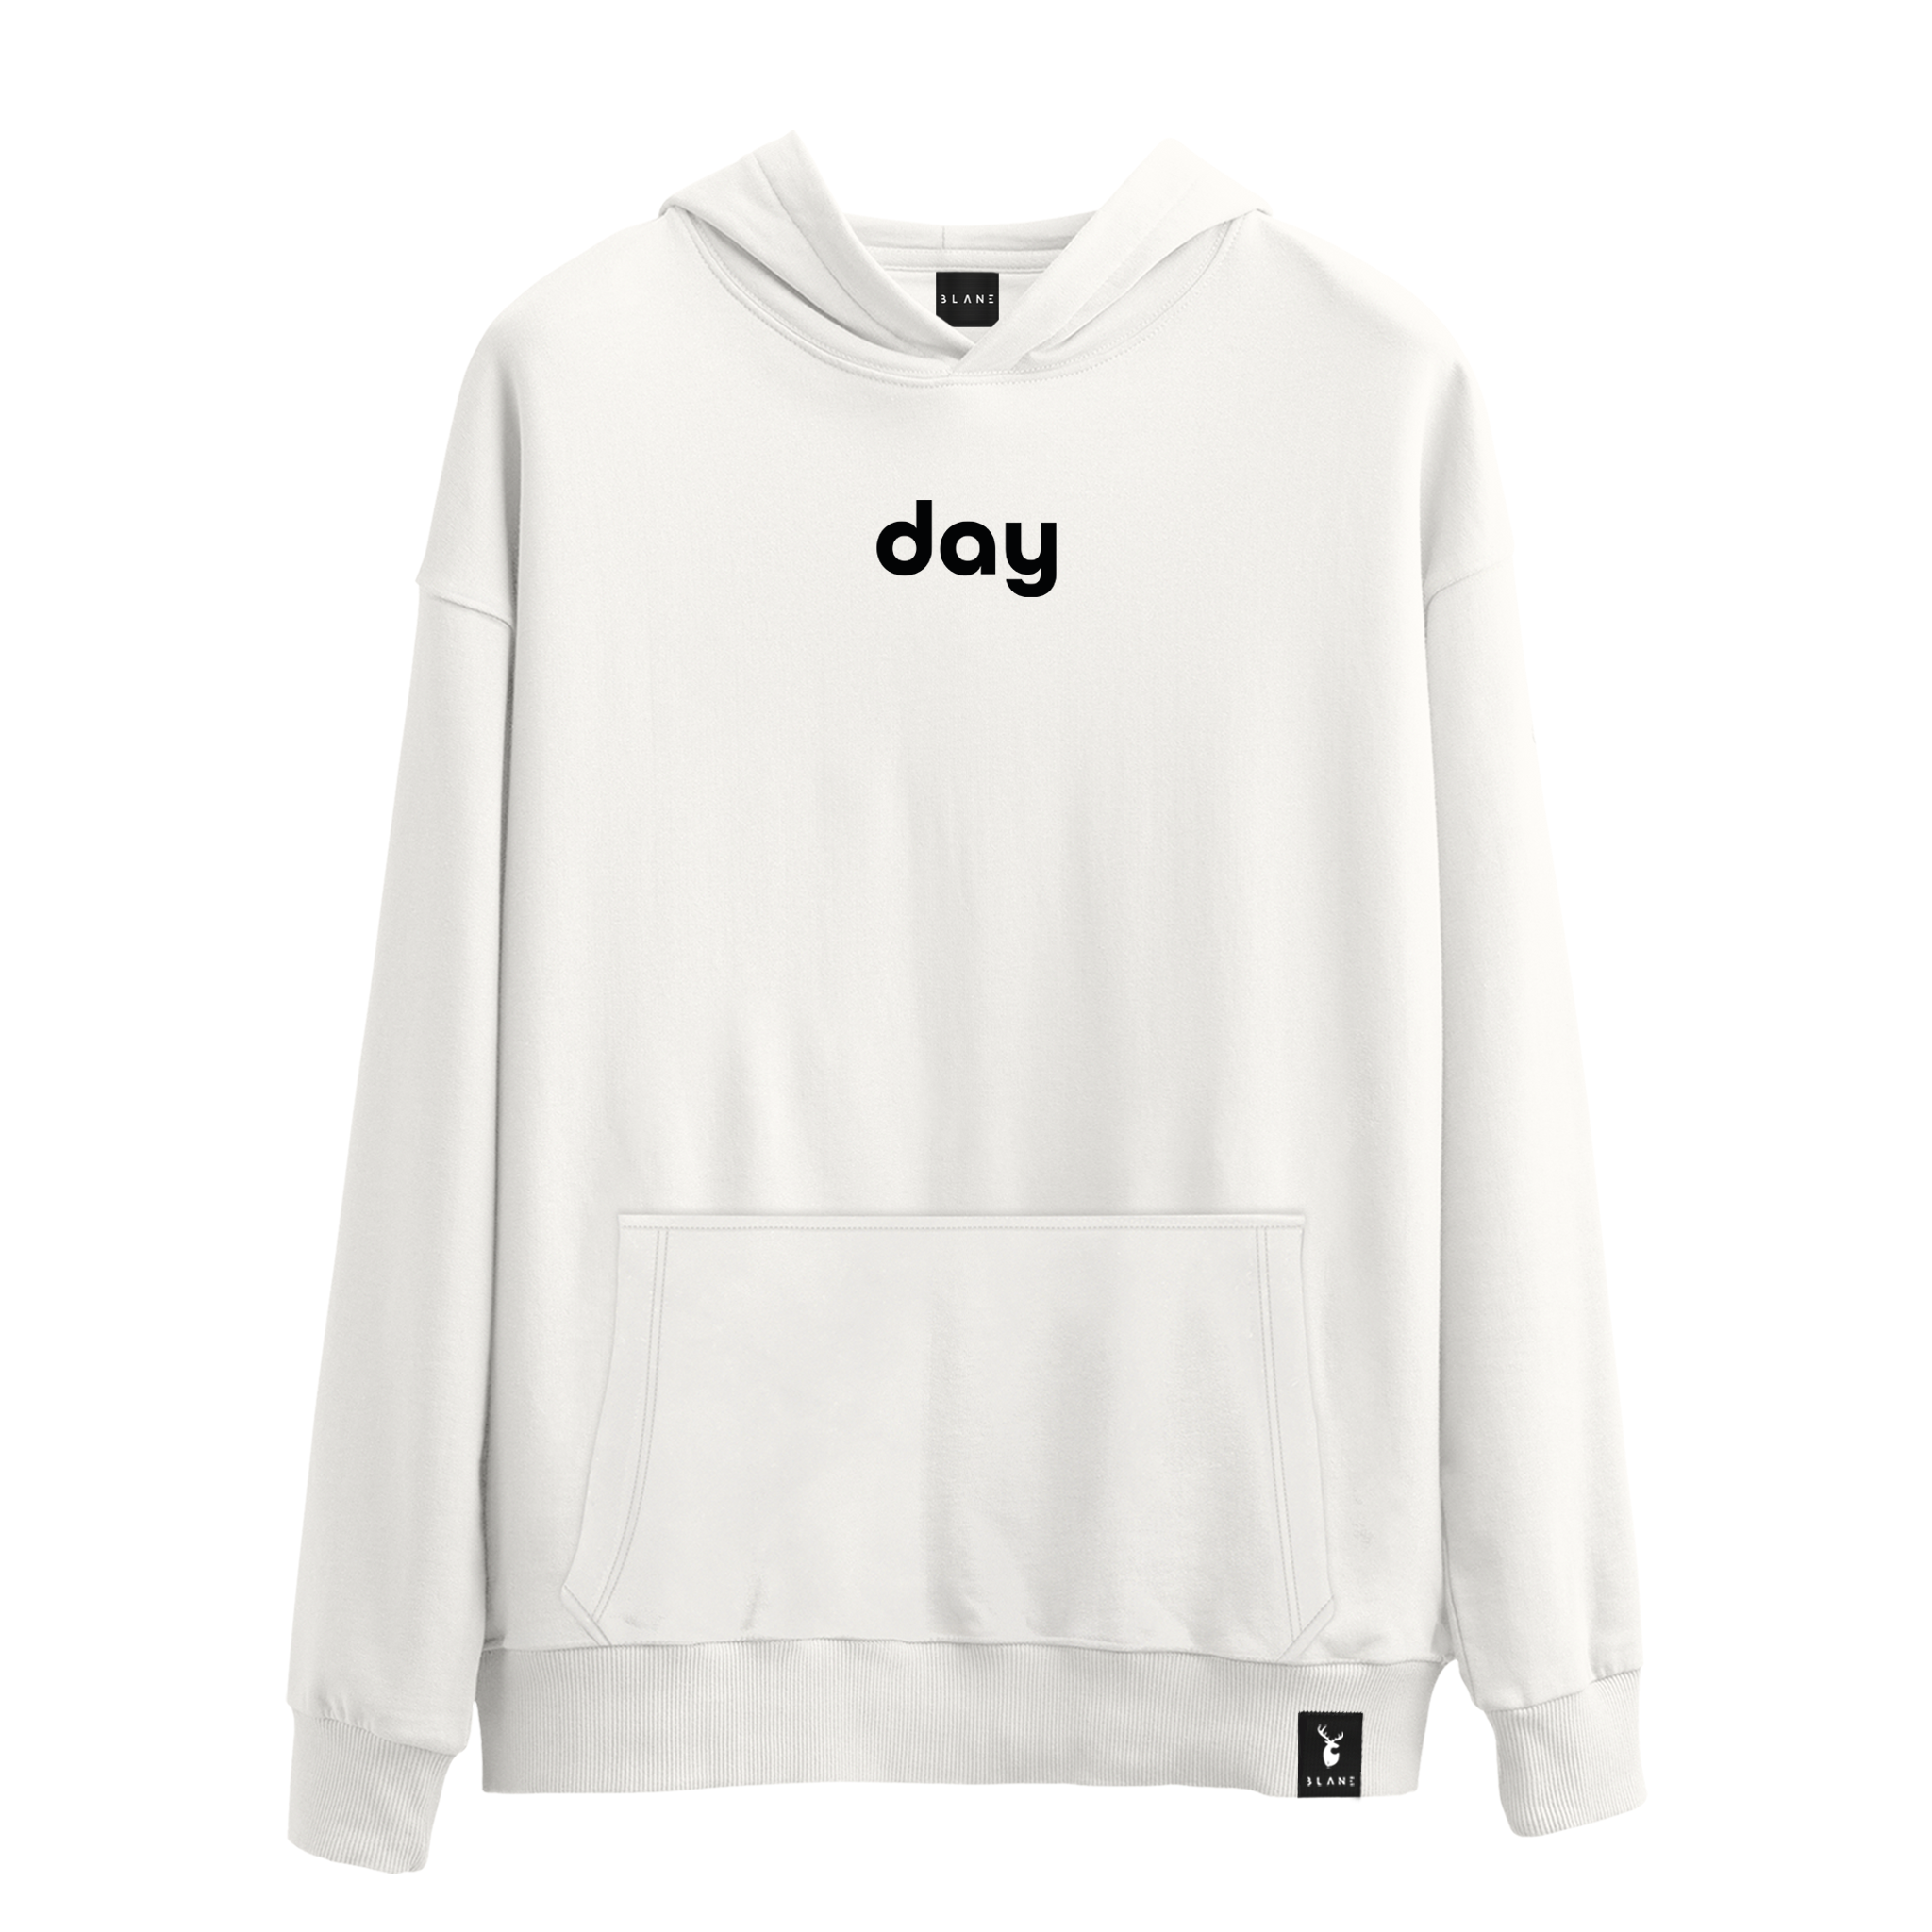 Day - Hoodie